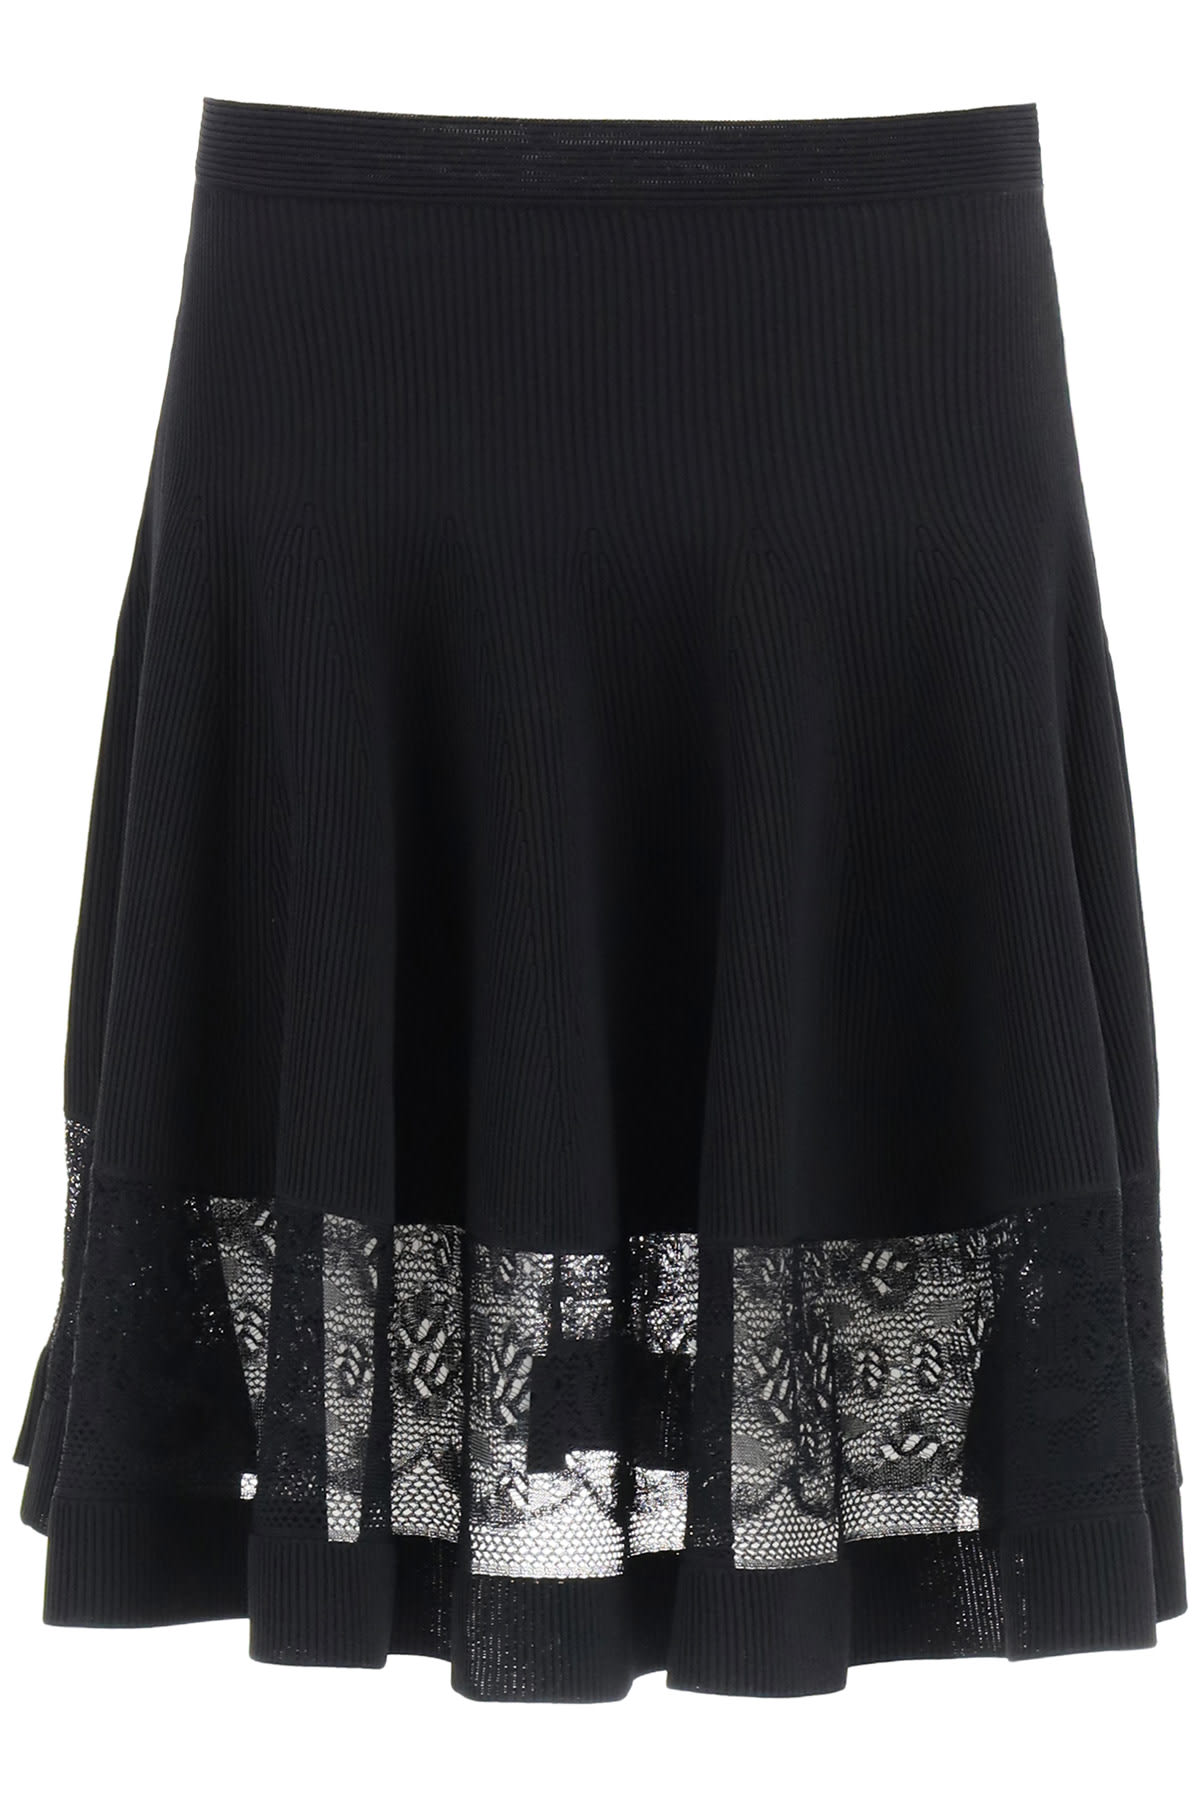 Alexander McQueen Mini Skirt With Lace